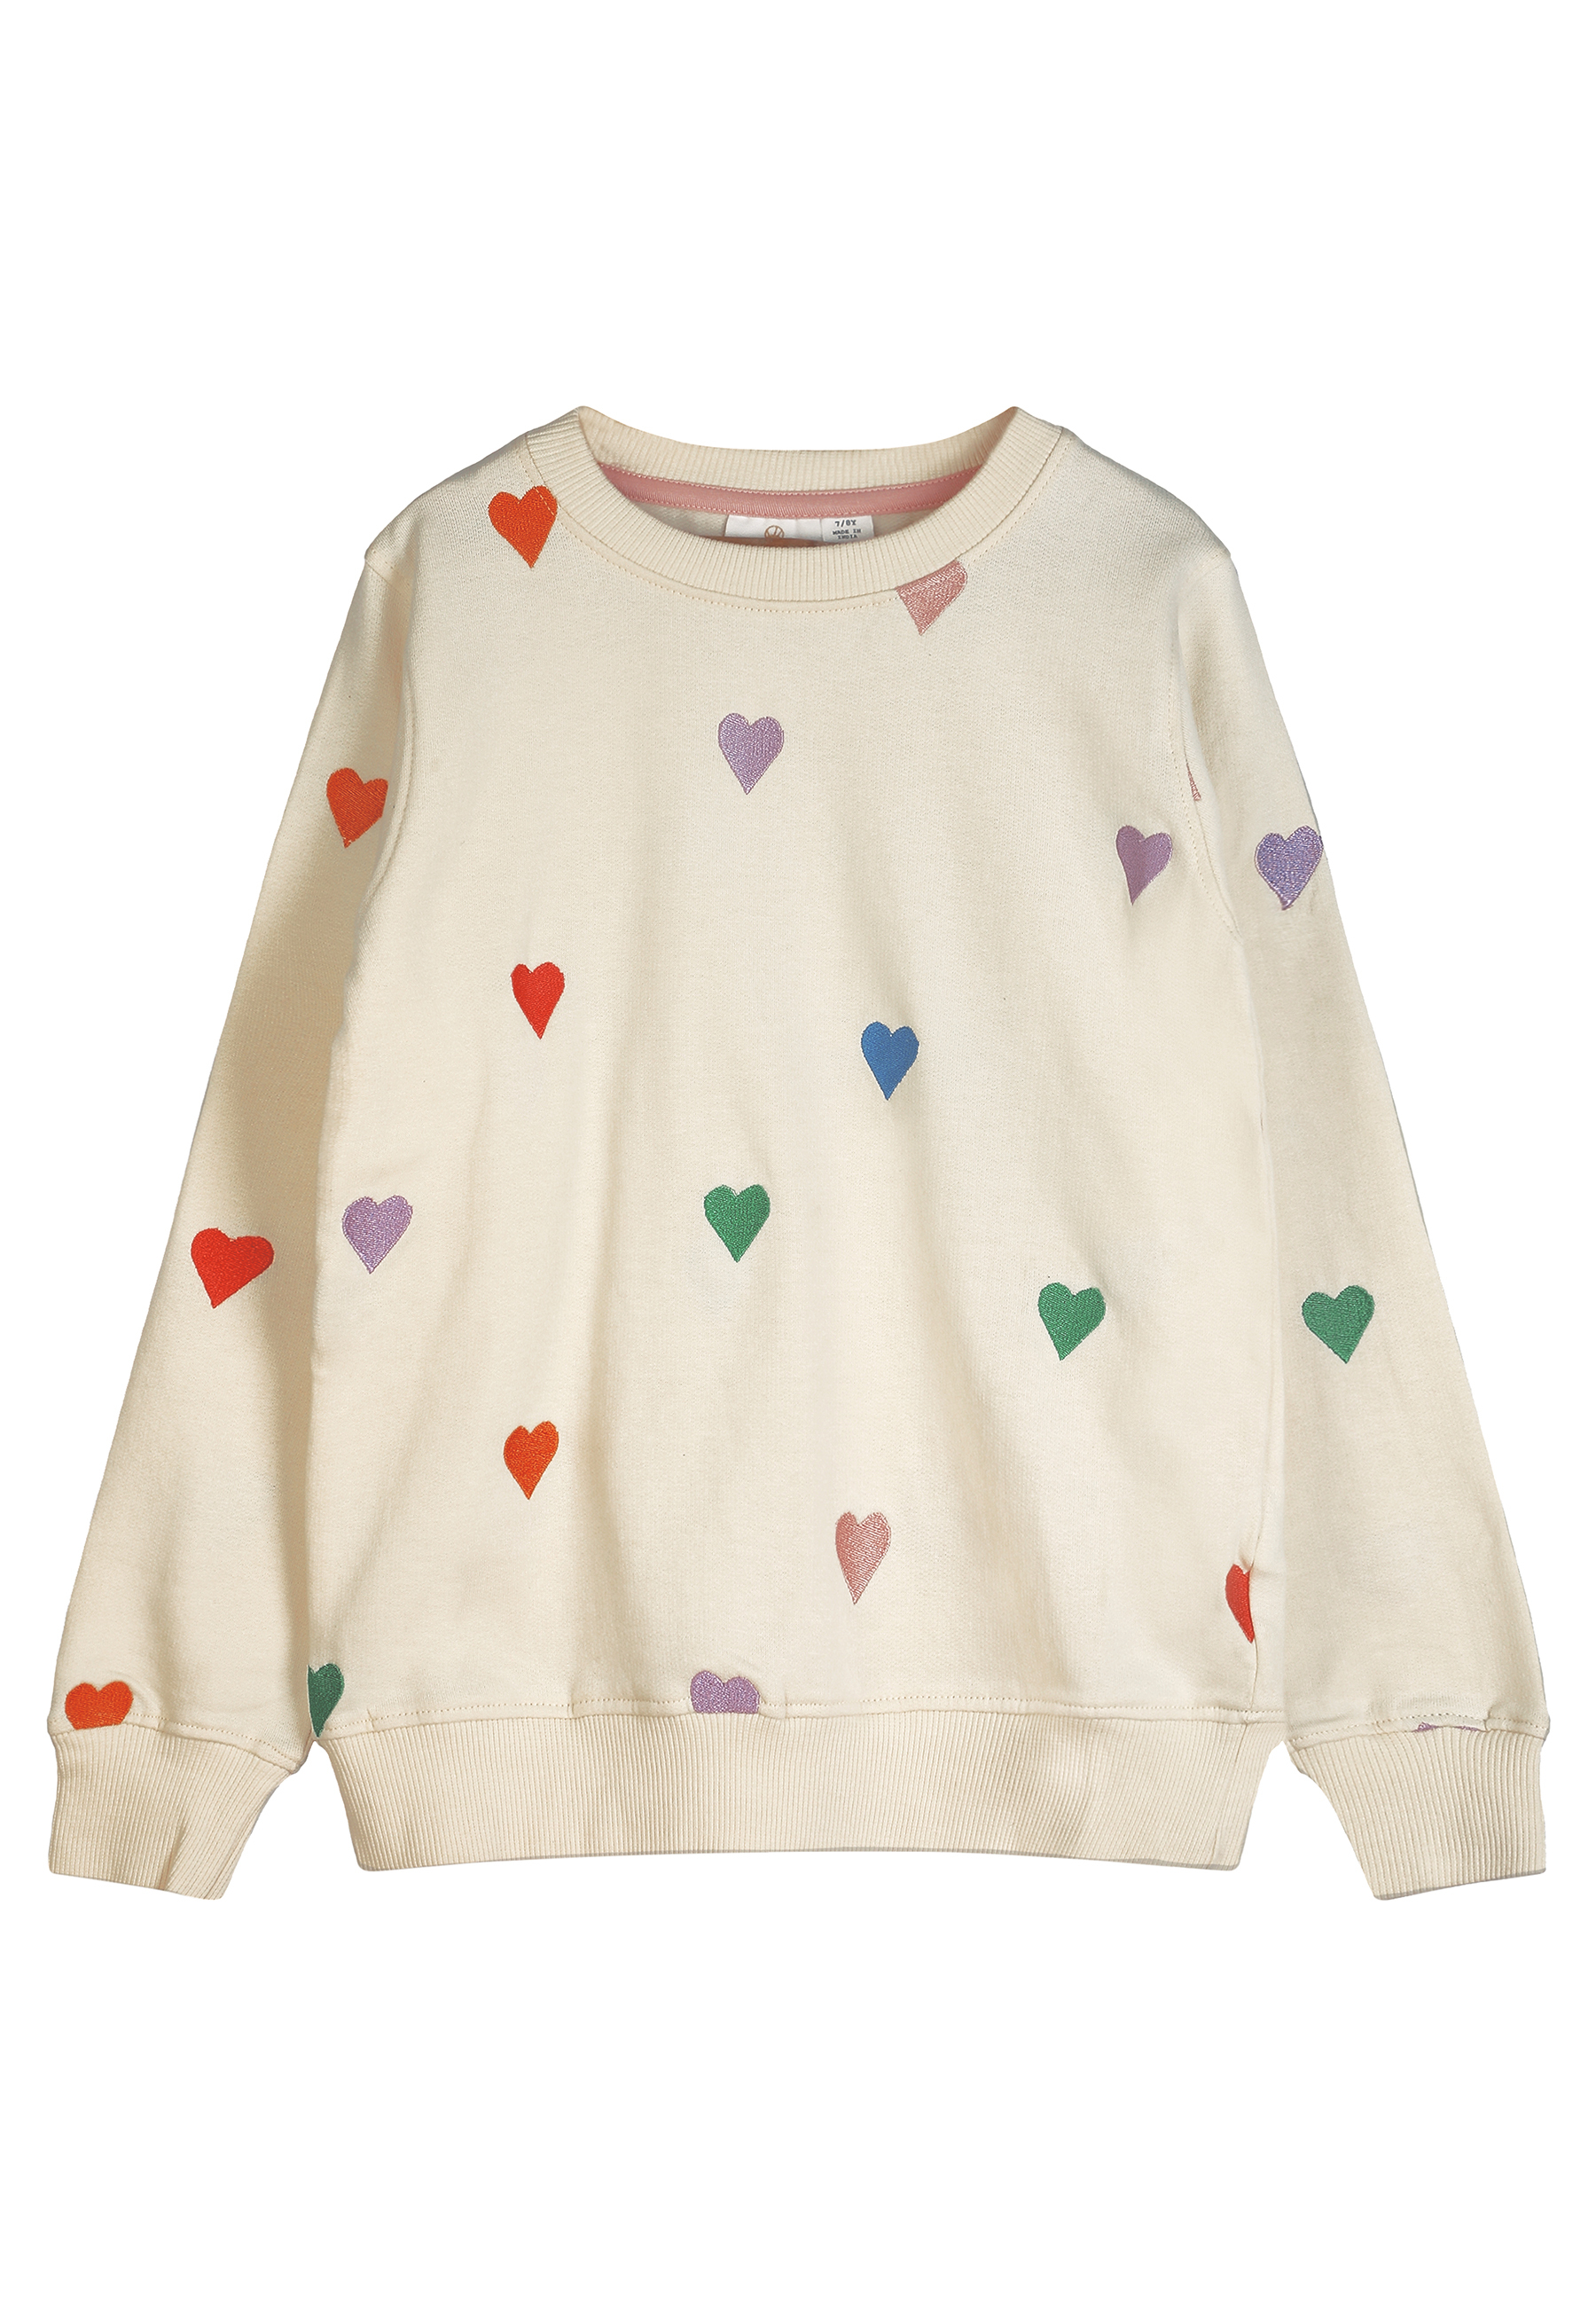 The New Sweater Heart